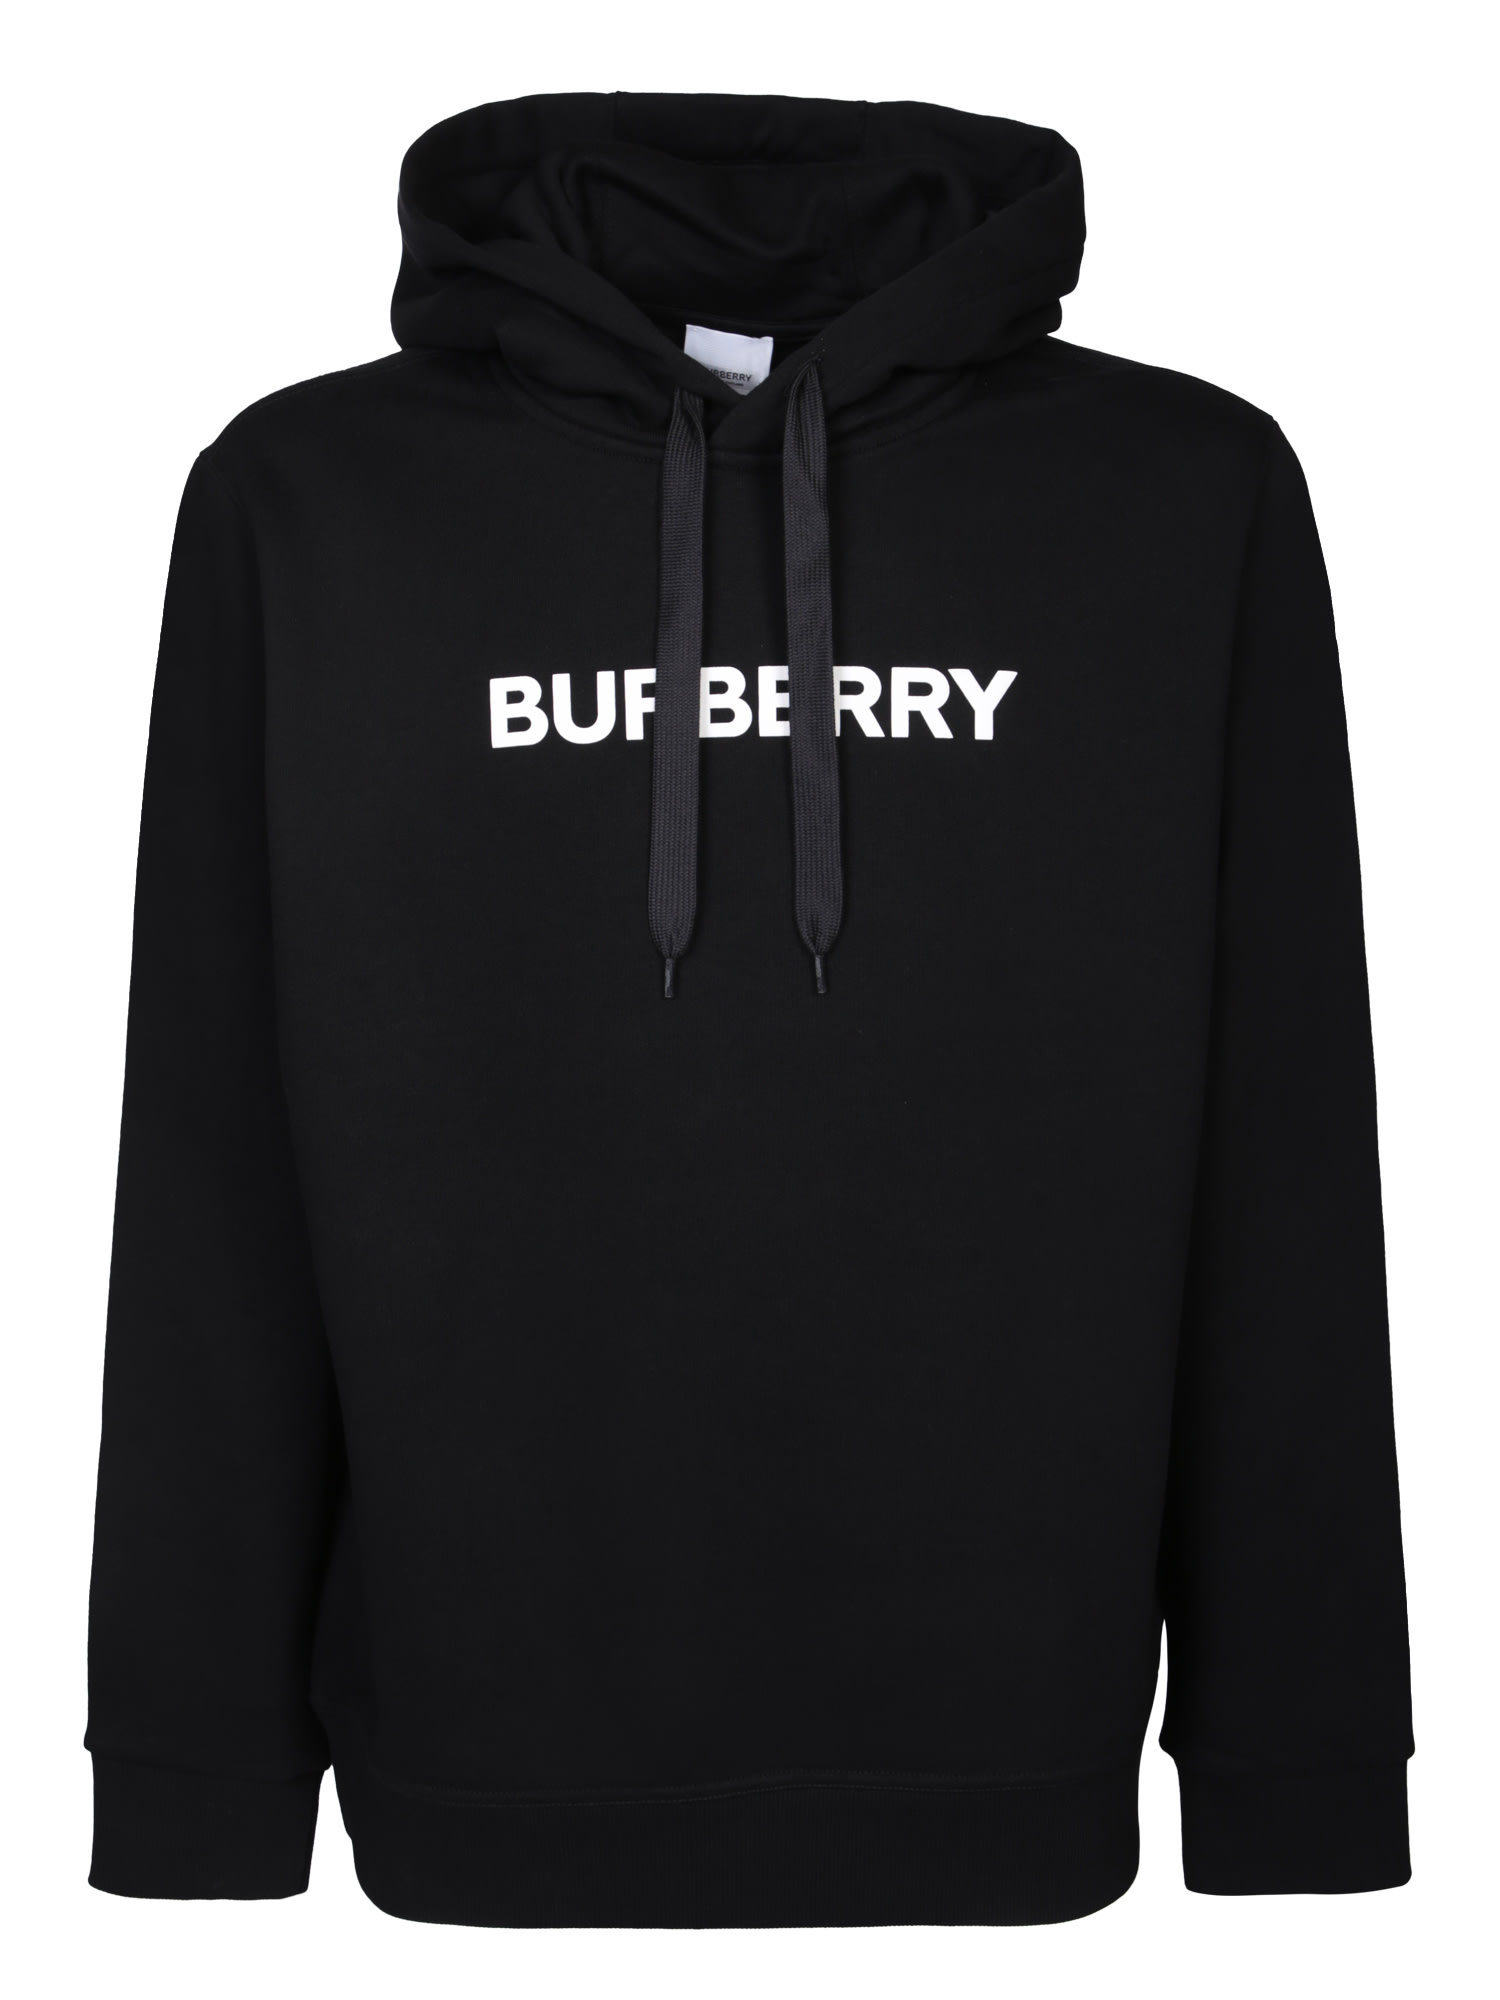 Burberry This  Hoodie Boasts A Casual Aesthetic Making It A Musthave In Black